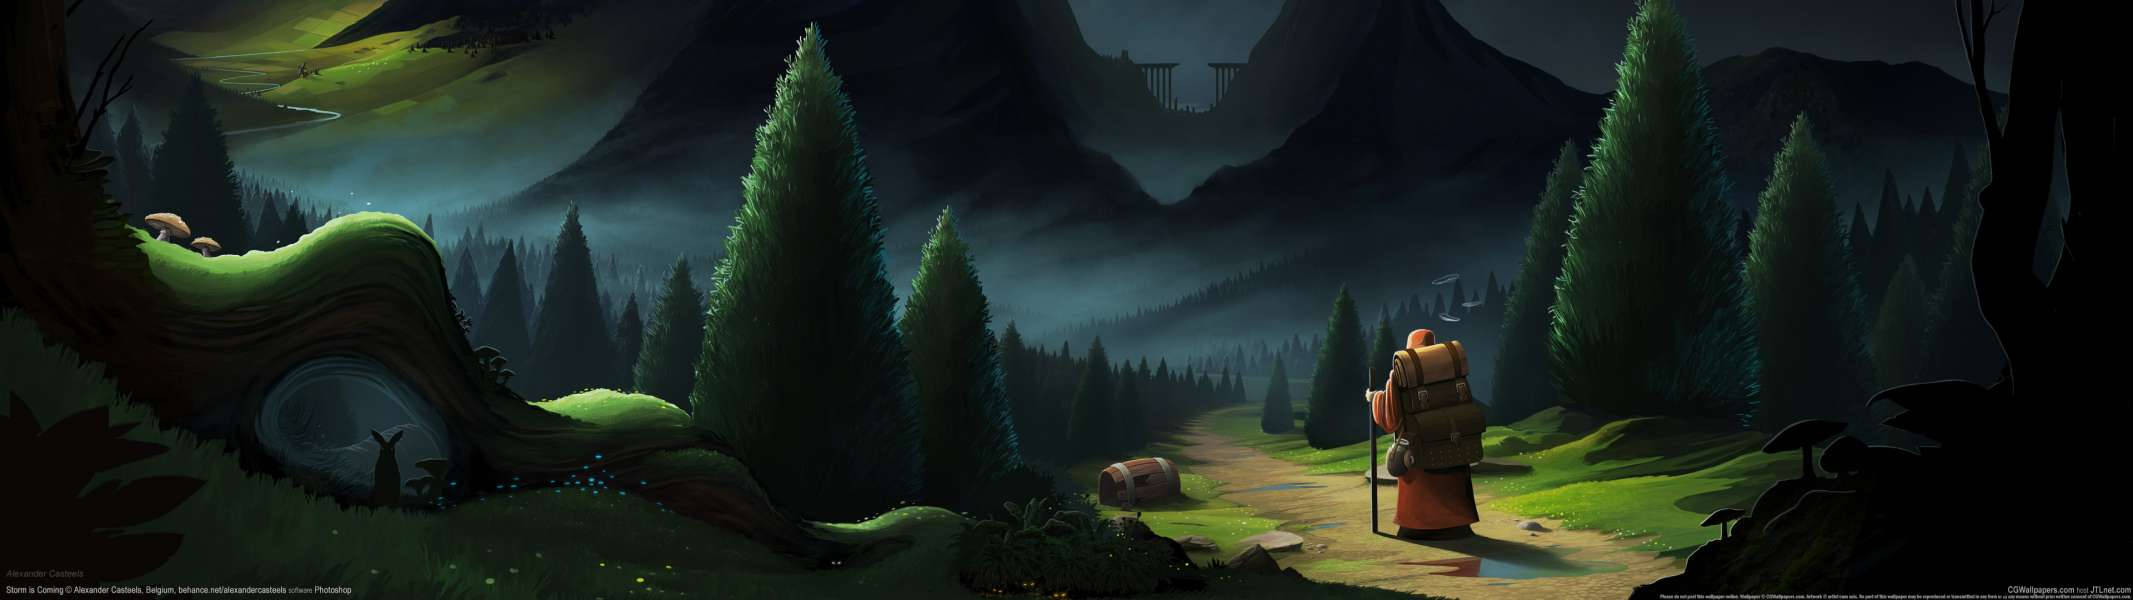 Download Dual Screen Animated Pine Forest Wallpaper 